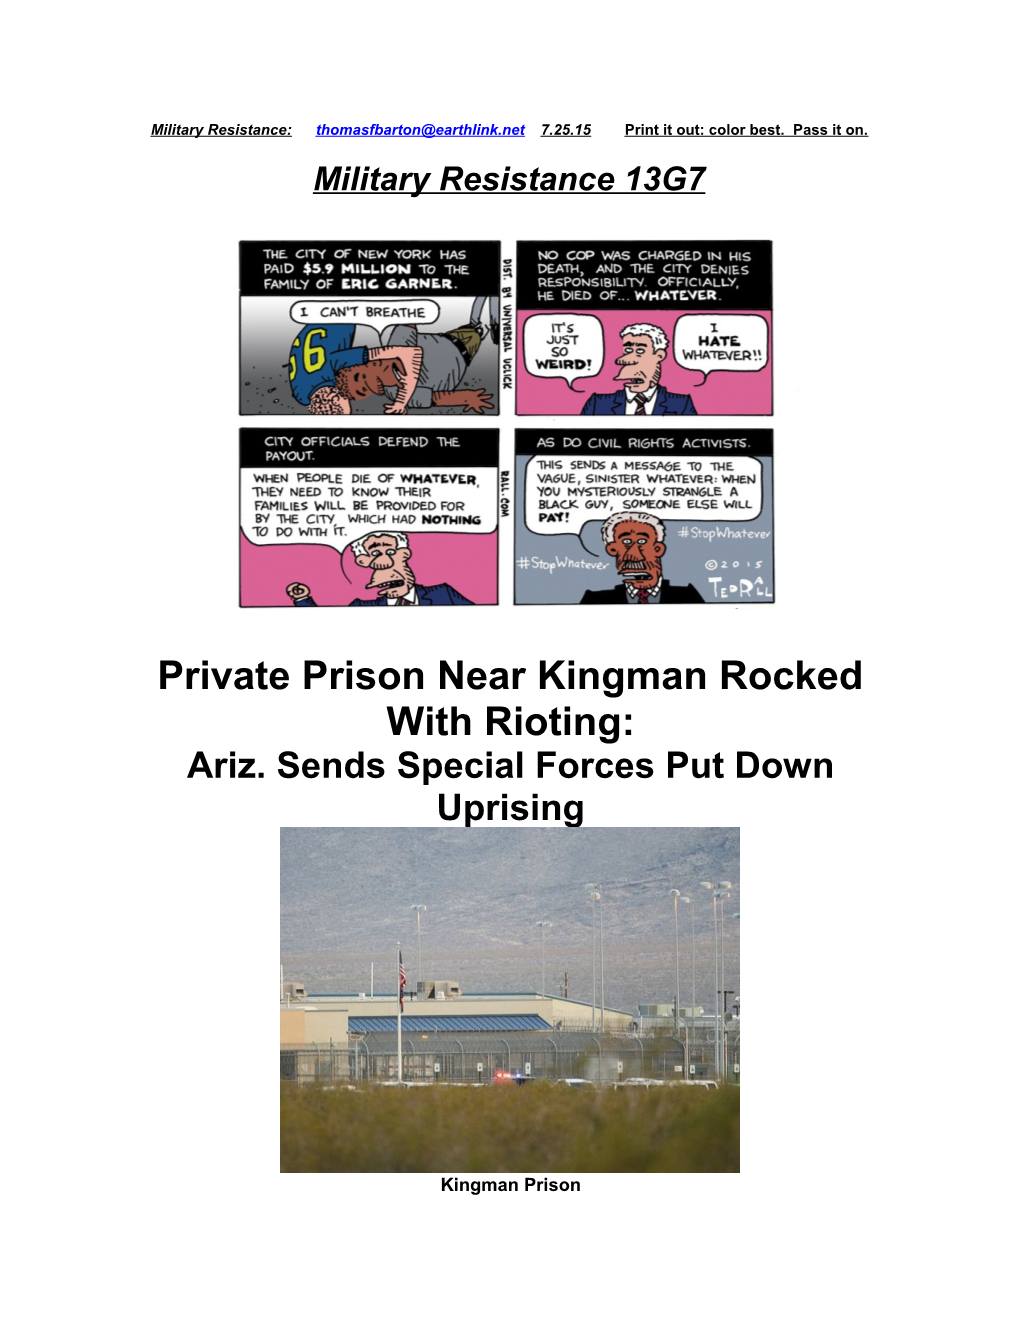 Private Prison Near Kingman Rocked with Rioting